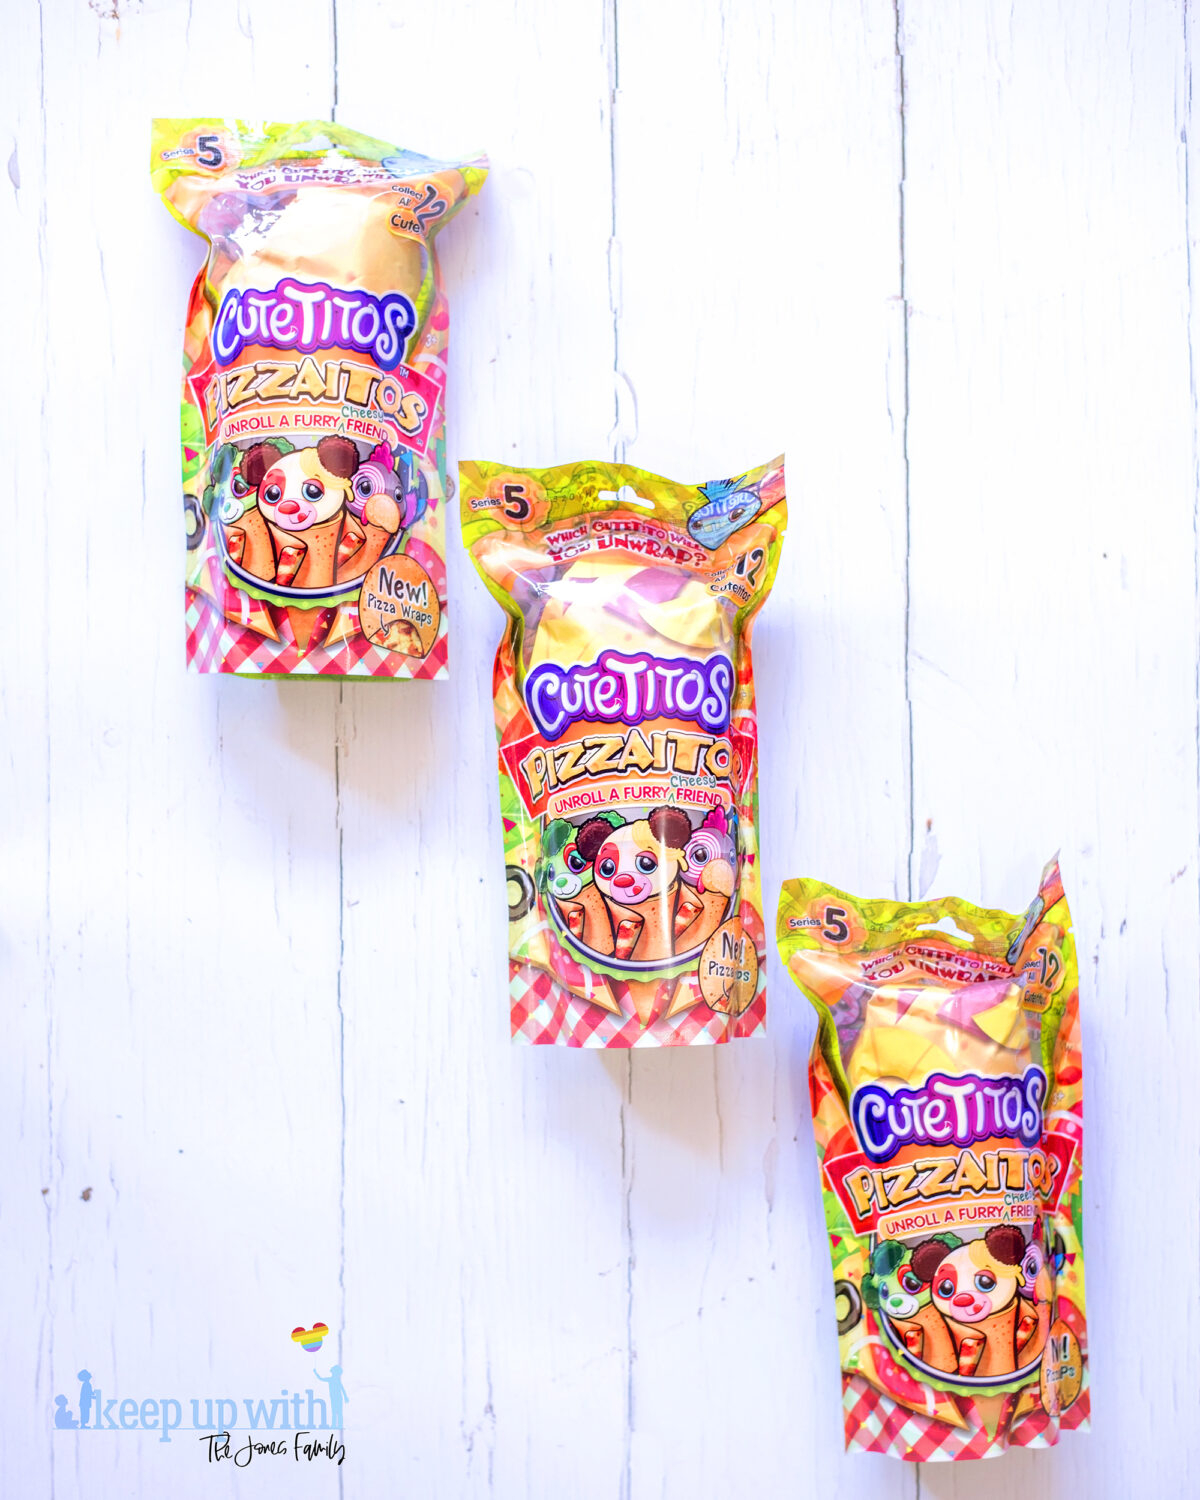 Cuteitos Pizzaitos. Image shows three Cuteitos Pizzaitos in their wrappers on a white wooden background. 